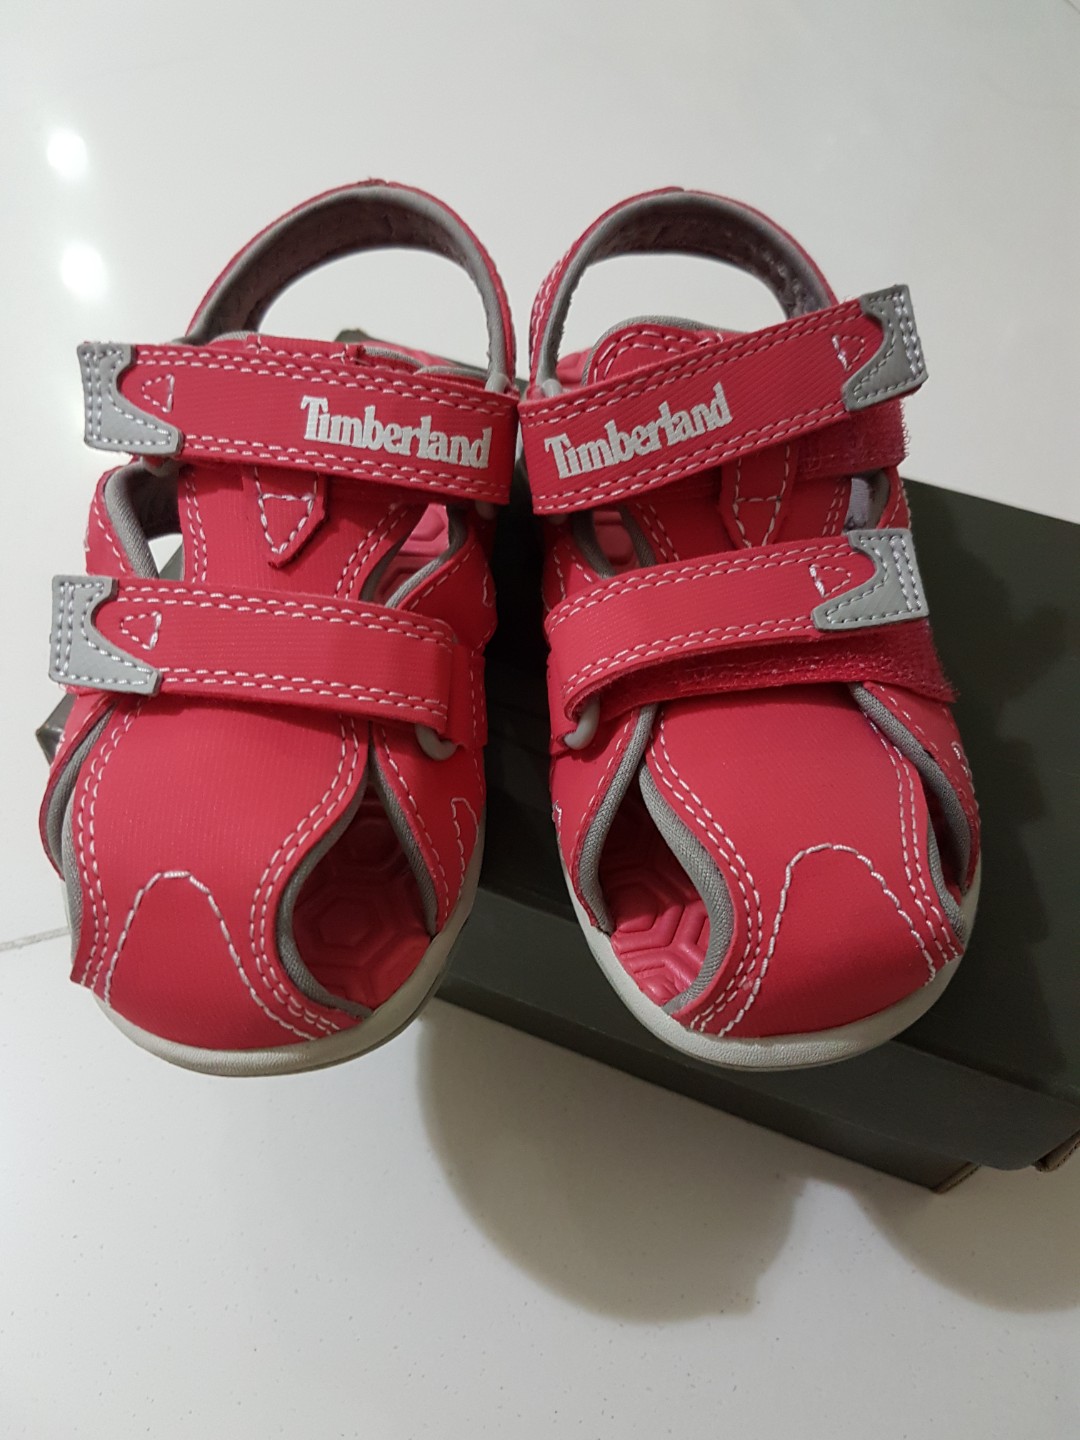 Authentic Timberland Sandals (BNWB 